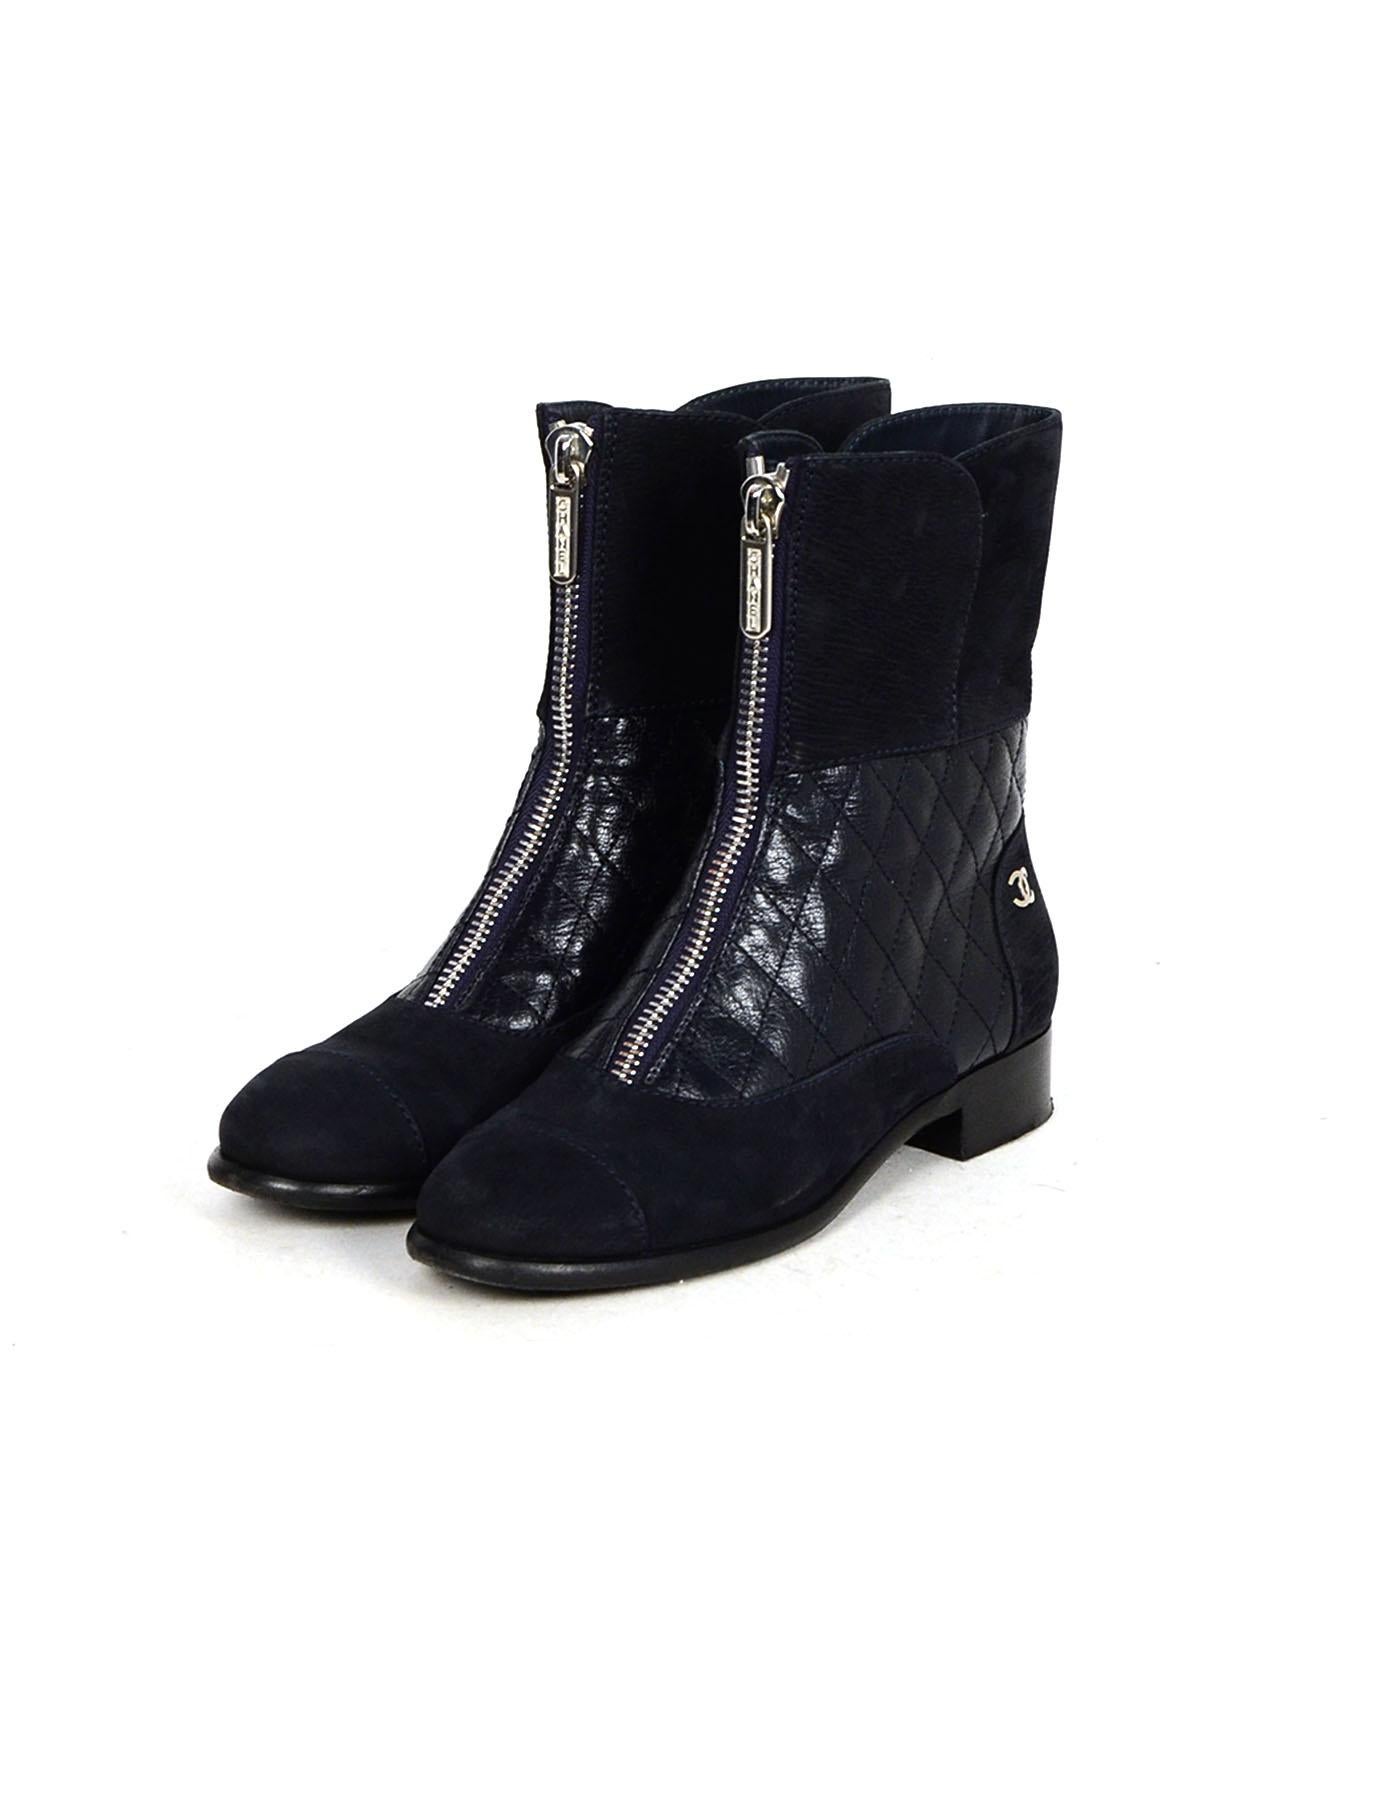 Chanel Navy Calfskin Quilted Zip Front Boots sz 37

Made In: Italy
Year of Production: 2016
Color: Blue
Hardware: Silvertone hardware
Materials: Calfskin leather, suede trim
Closure/Opening: Front zip
Overall Condition: Very good pre-owned